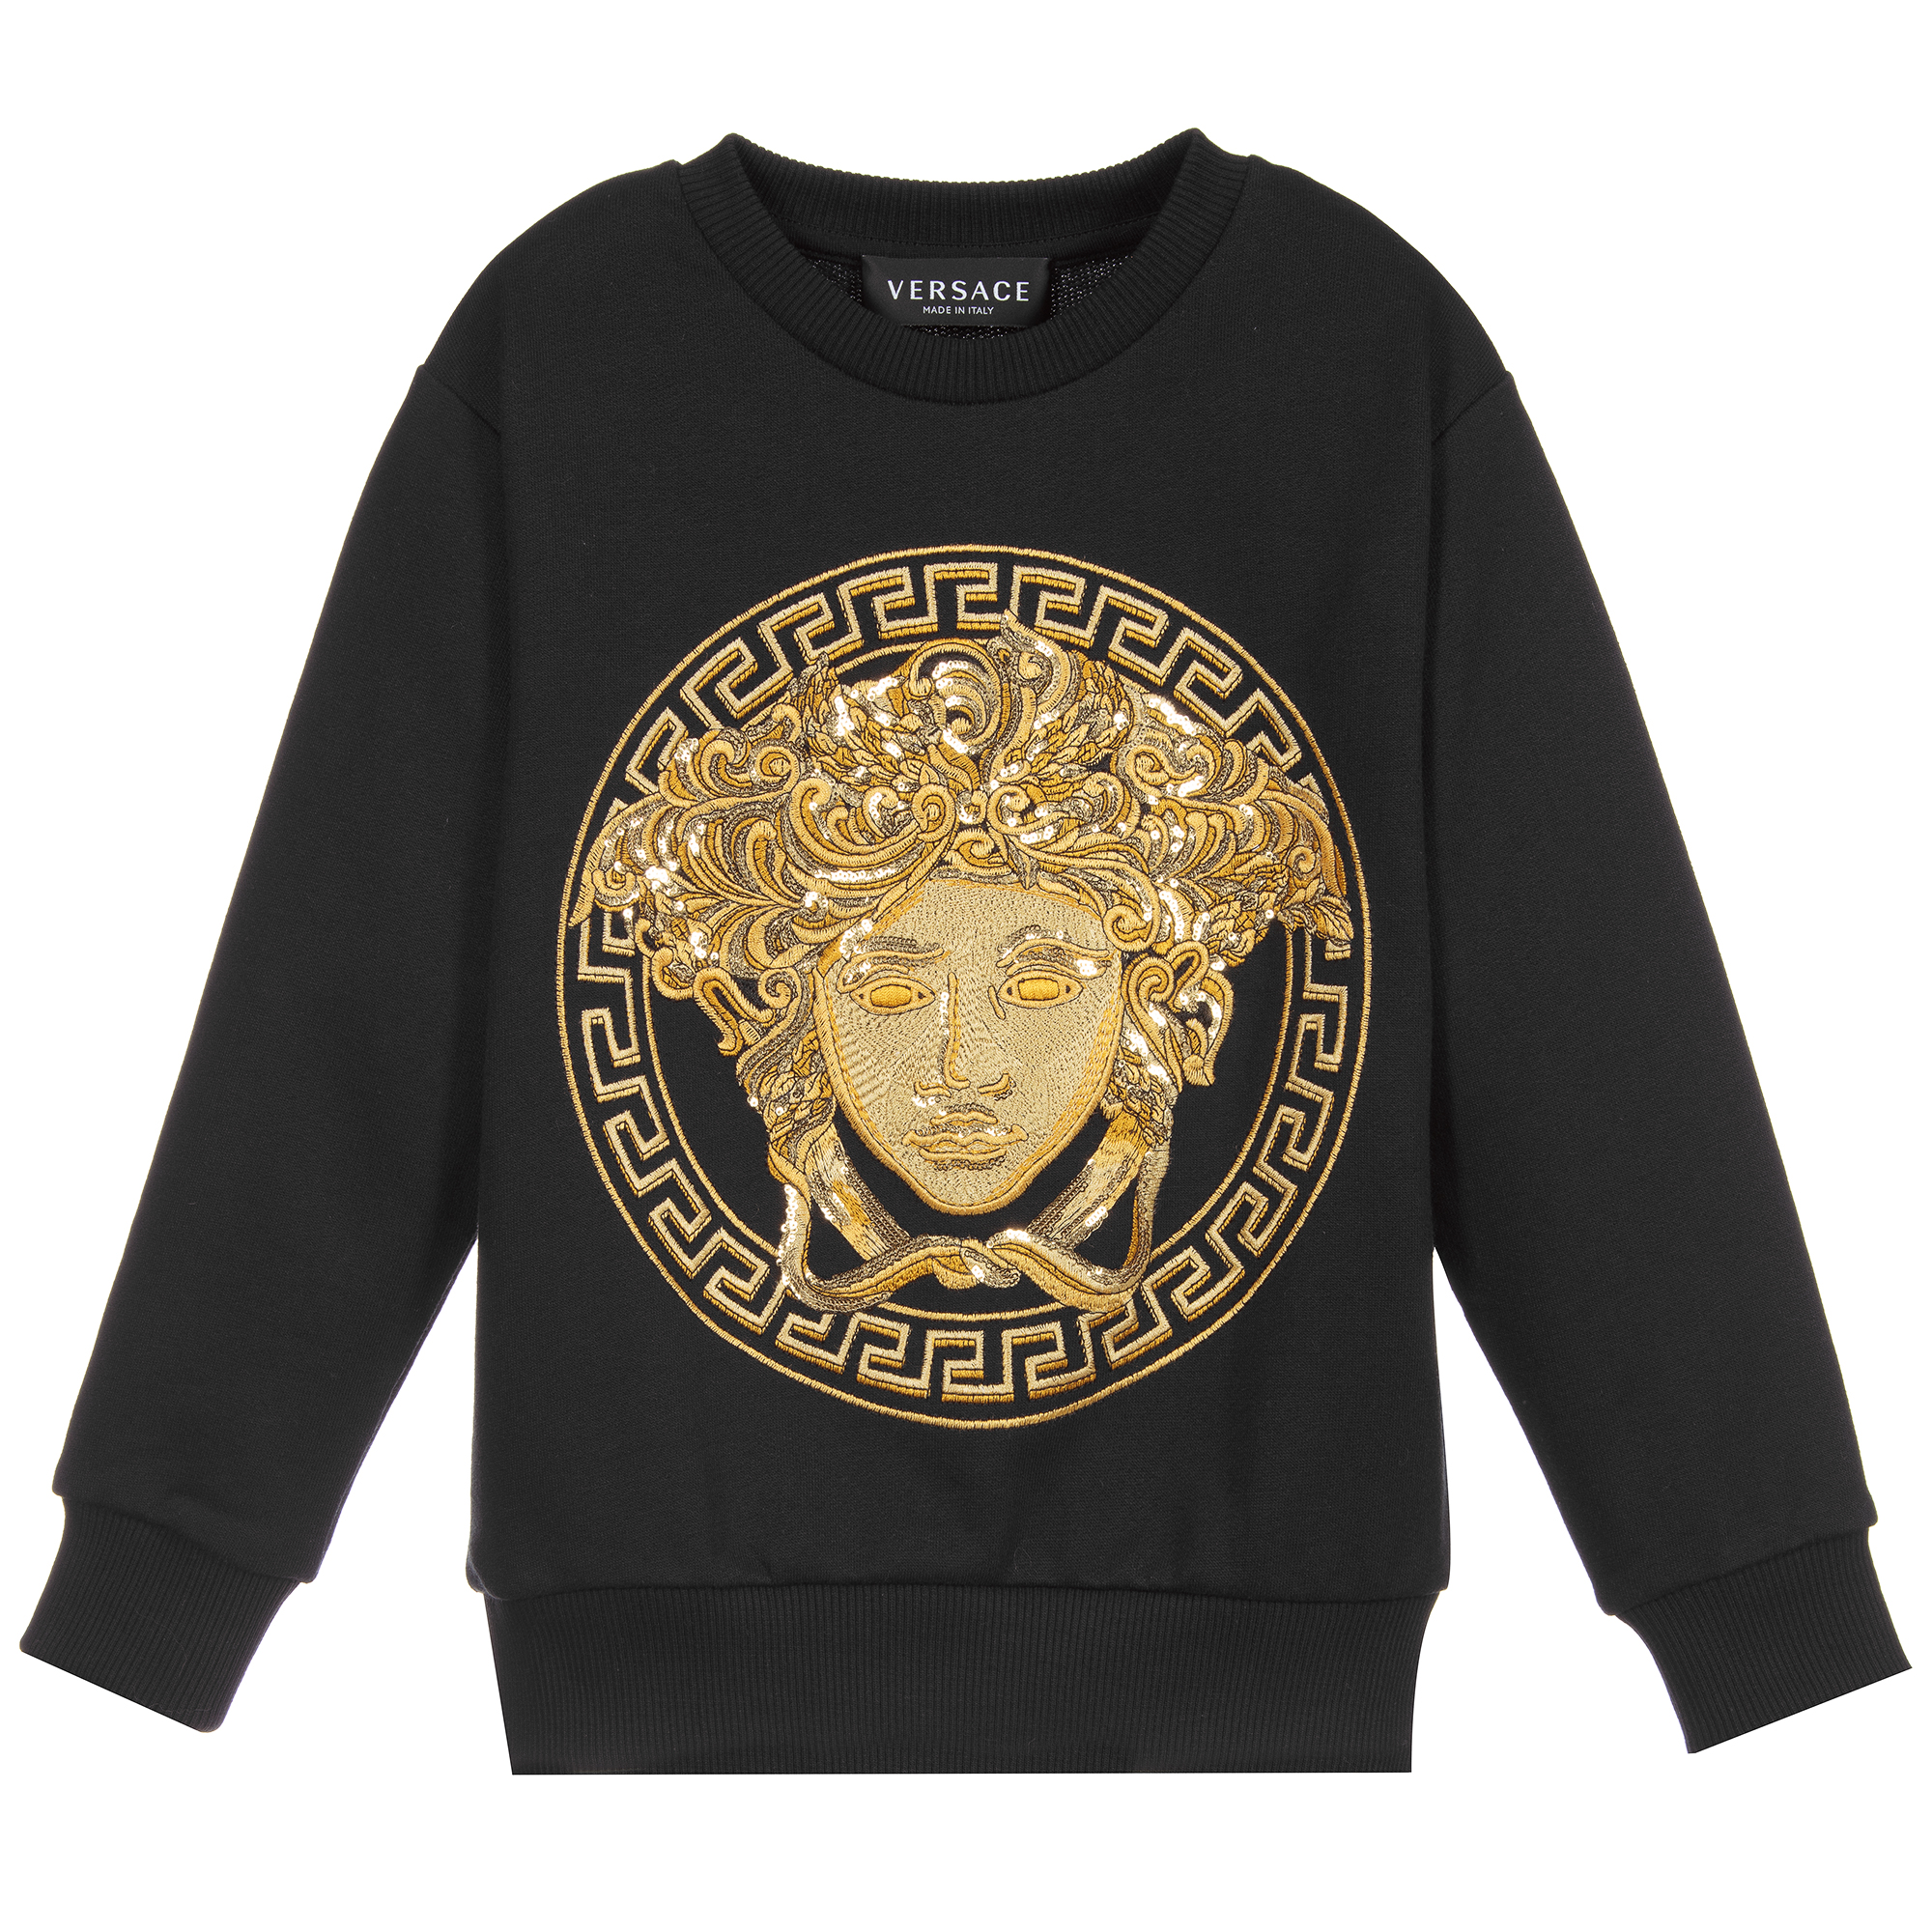 versace jumper black and gold